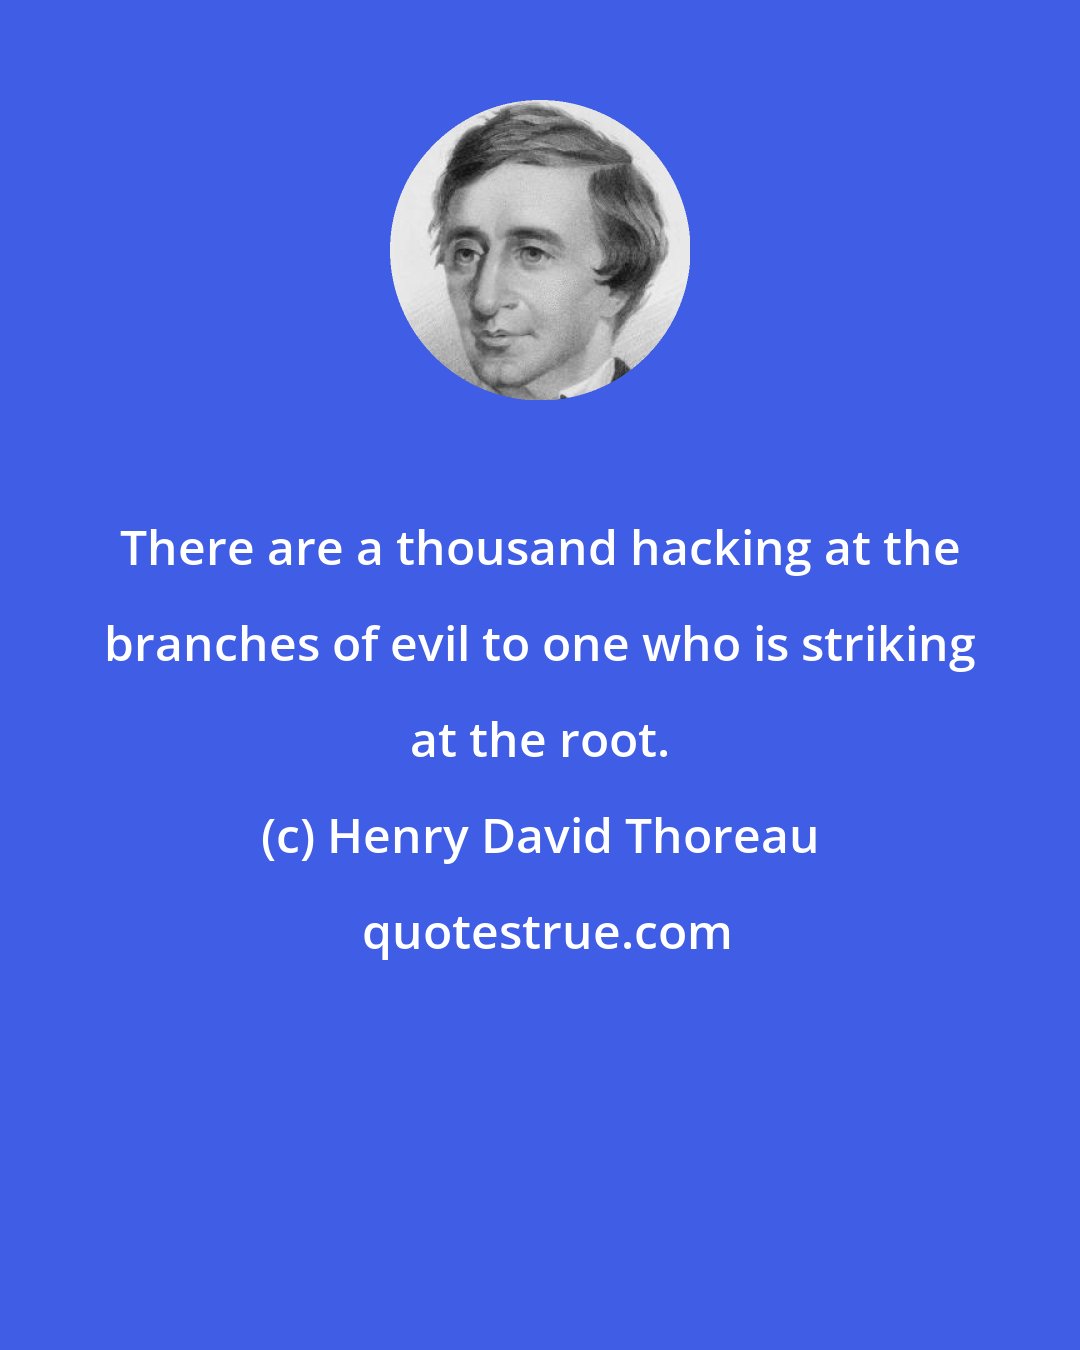 Henry David Thoreau: There are a thousand hacking at the branches of evil to one who is striking at the root.